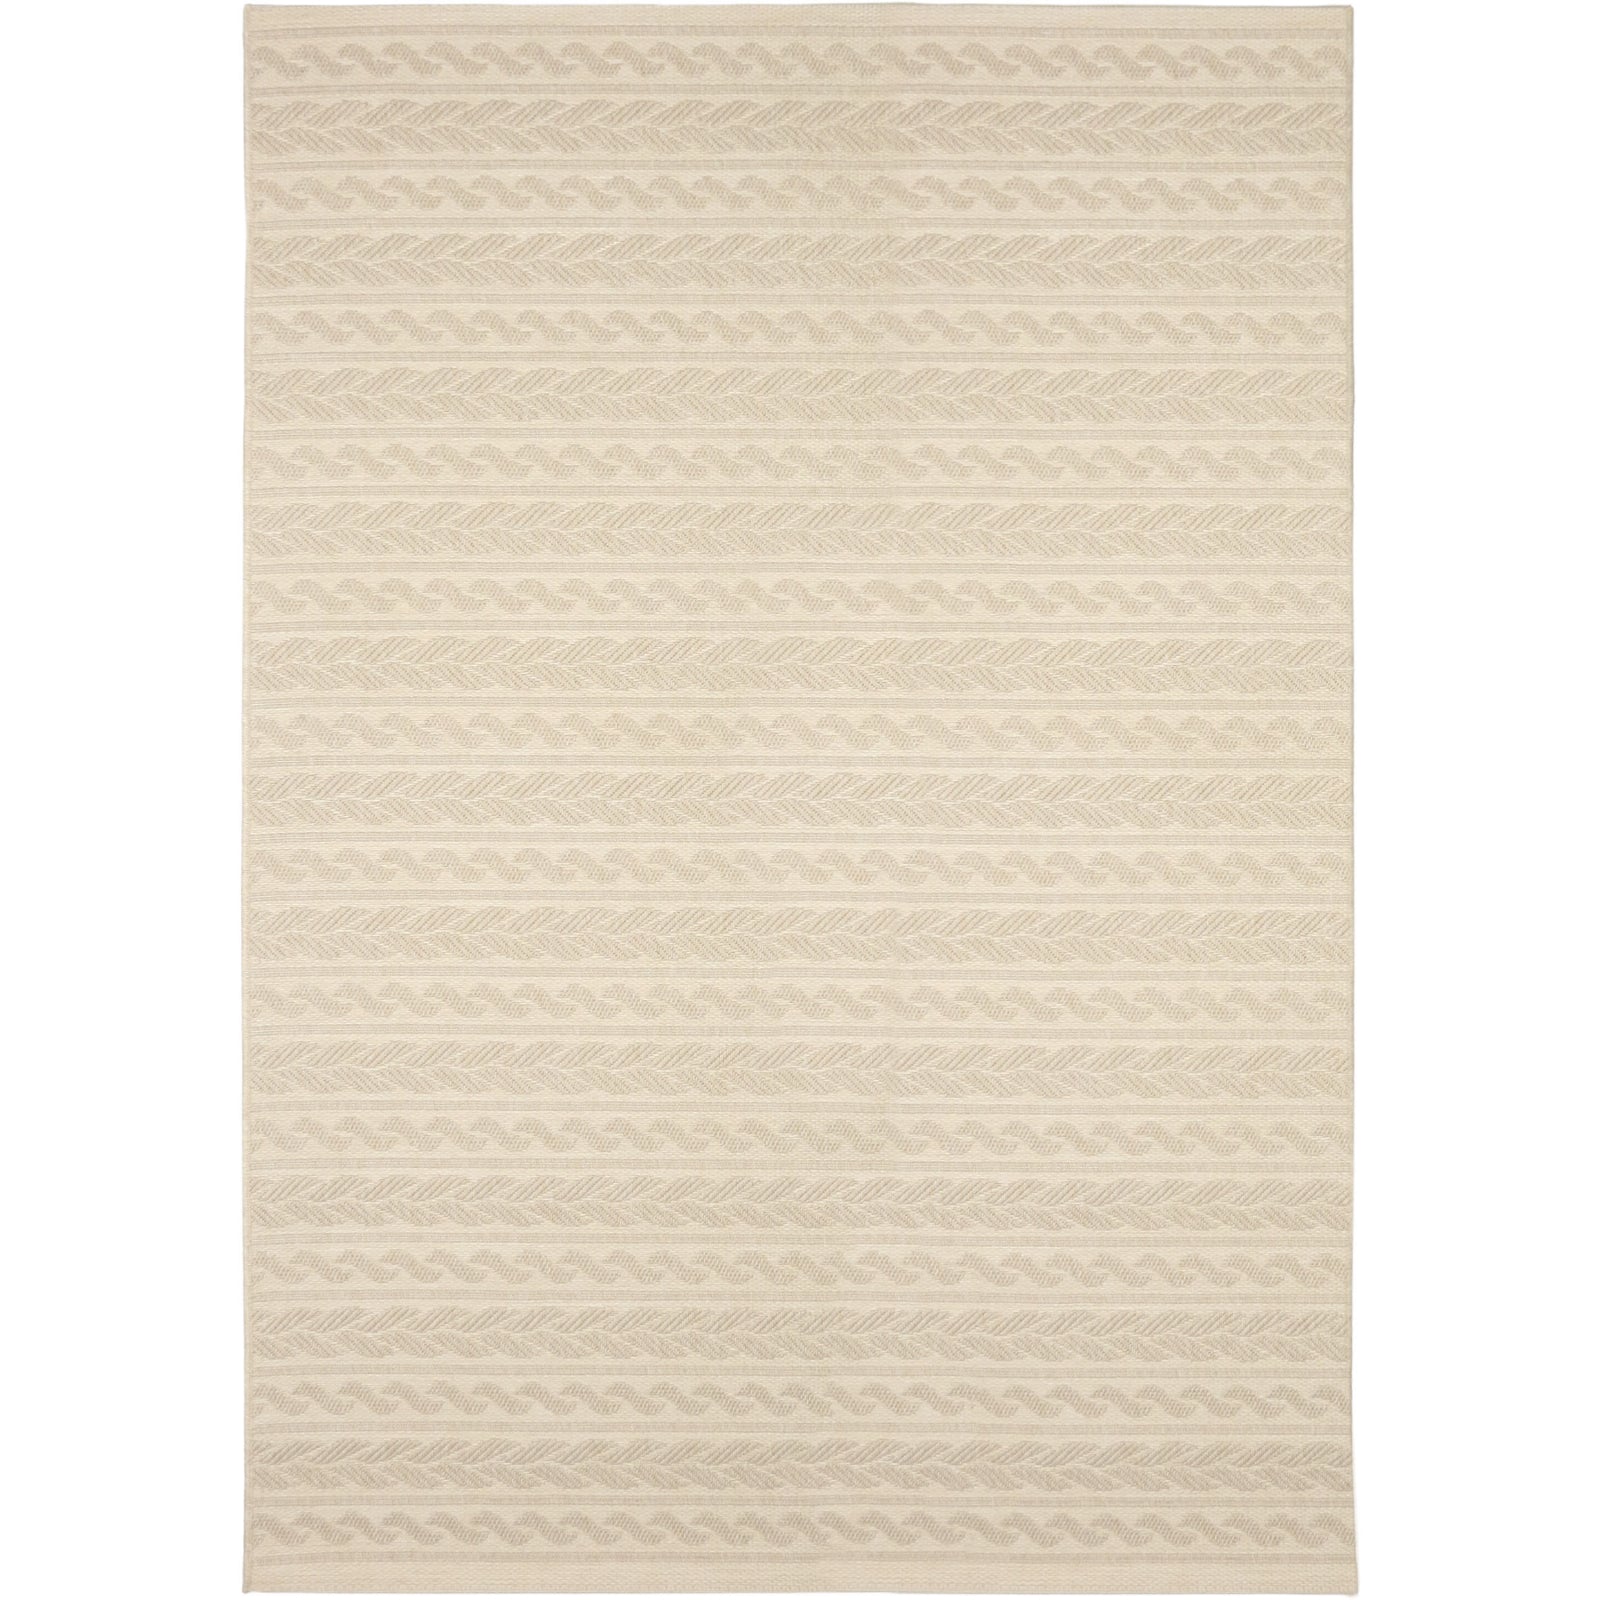 Orian Rugs Waterfront Twisted Sand Ivory Area Rug main image